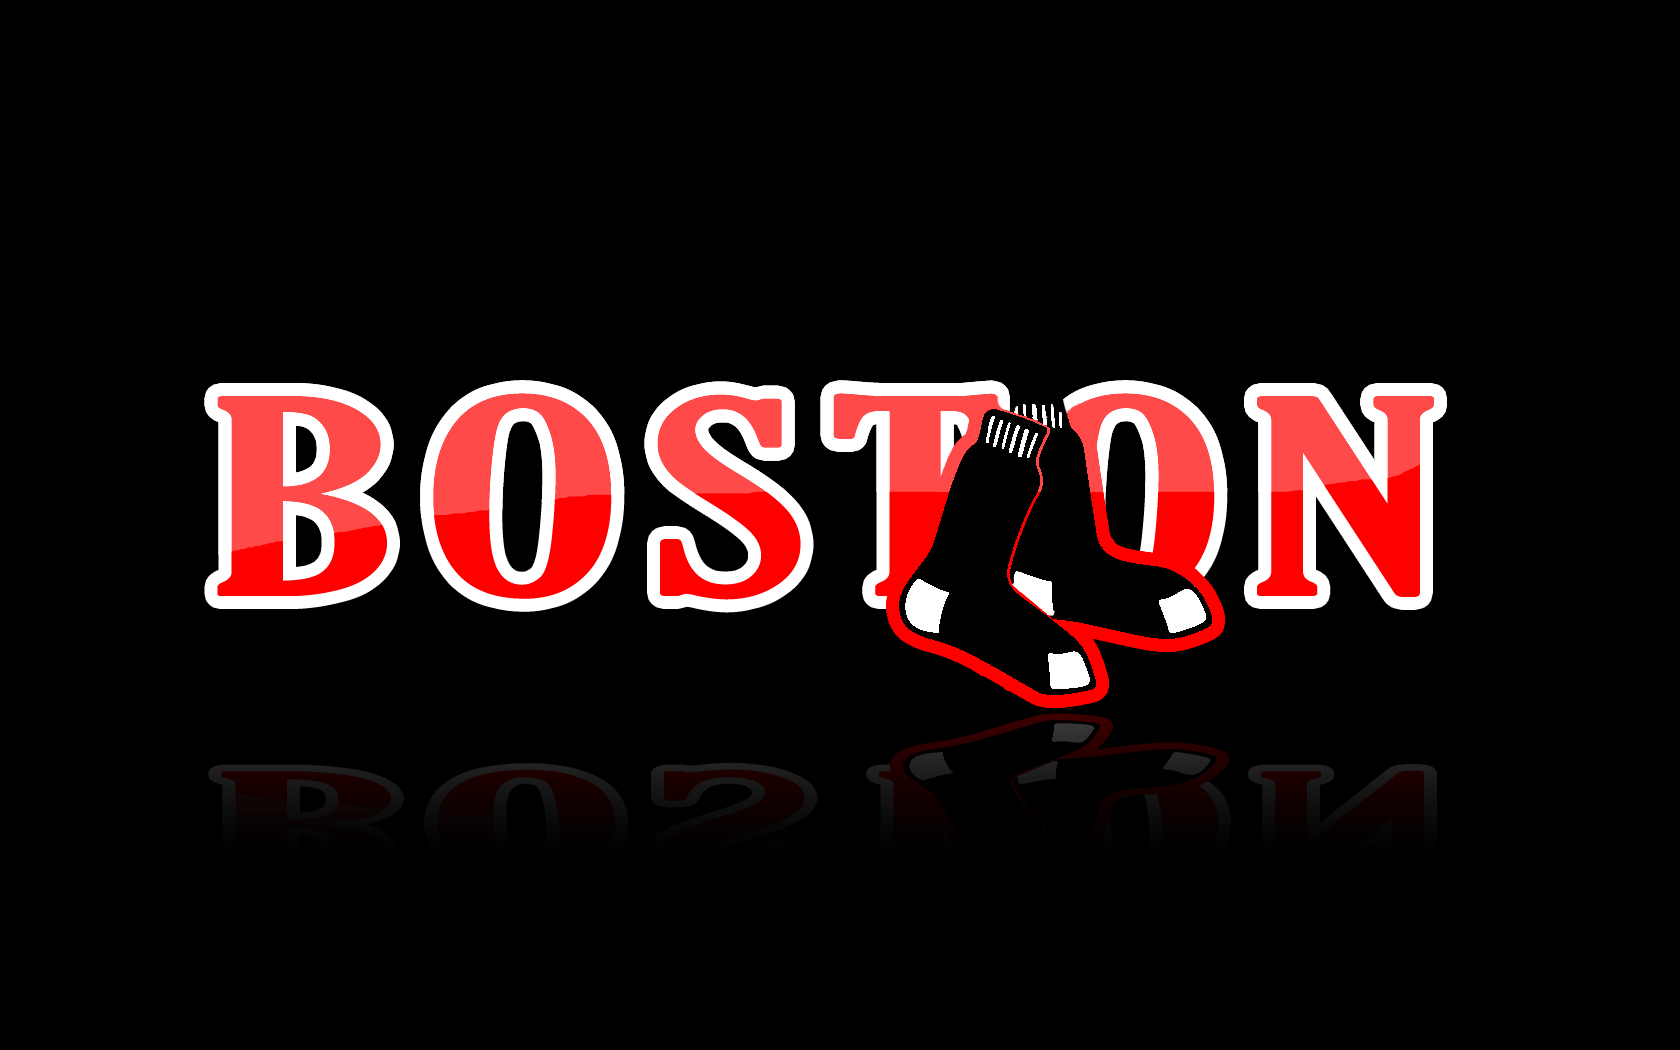 Logo And B Letter Wallpaper Red Sox Boston taken from Boston Red